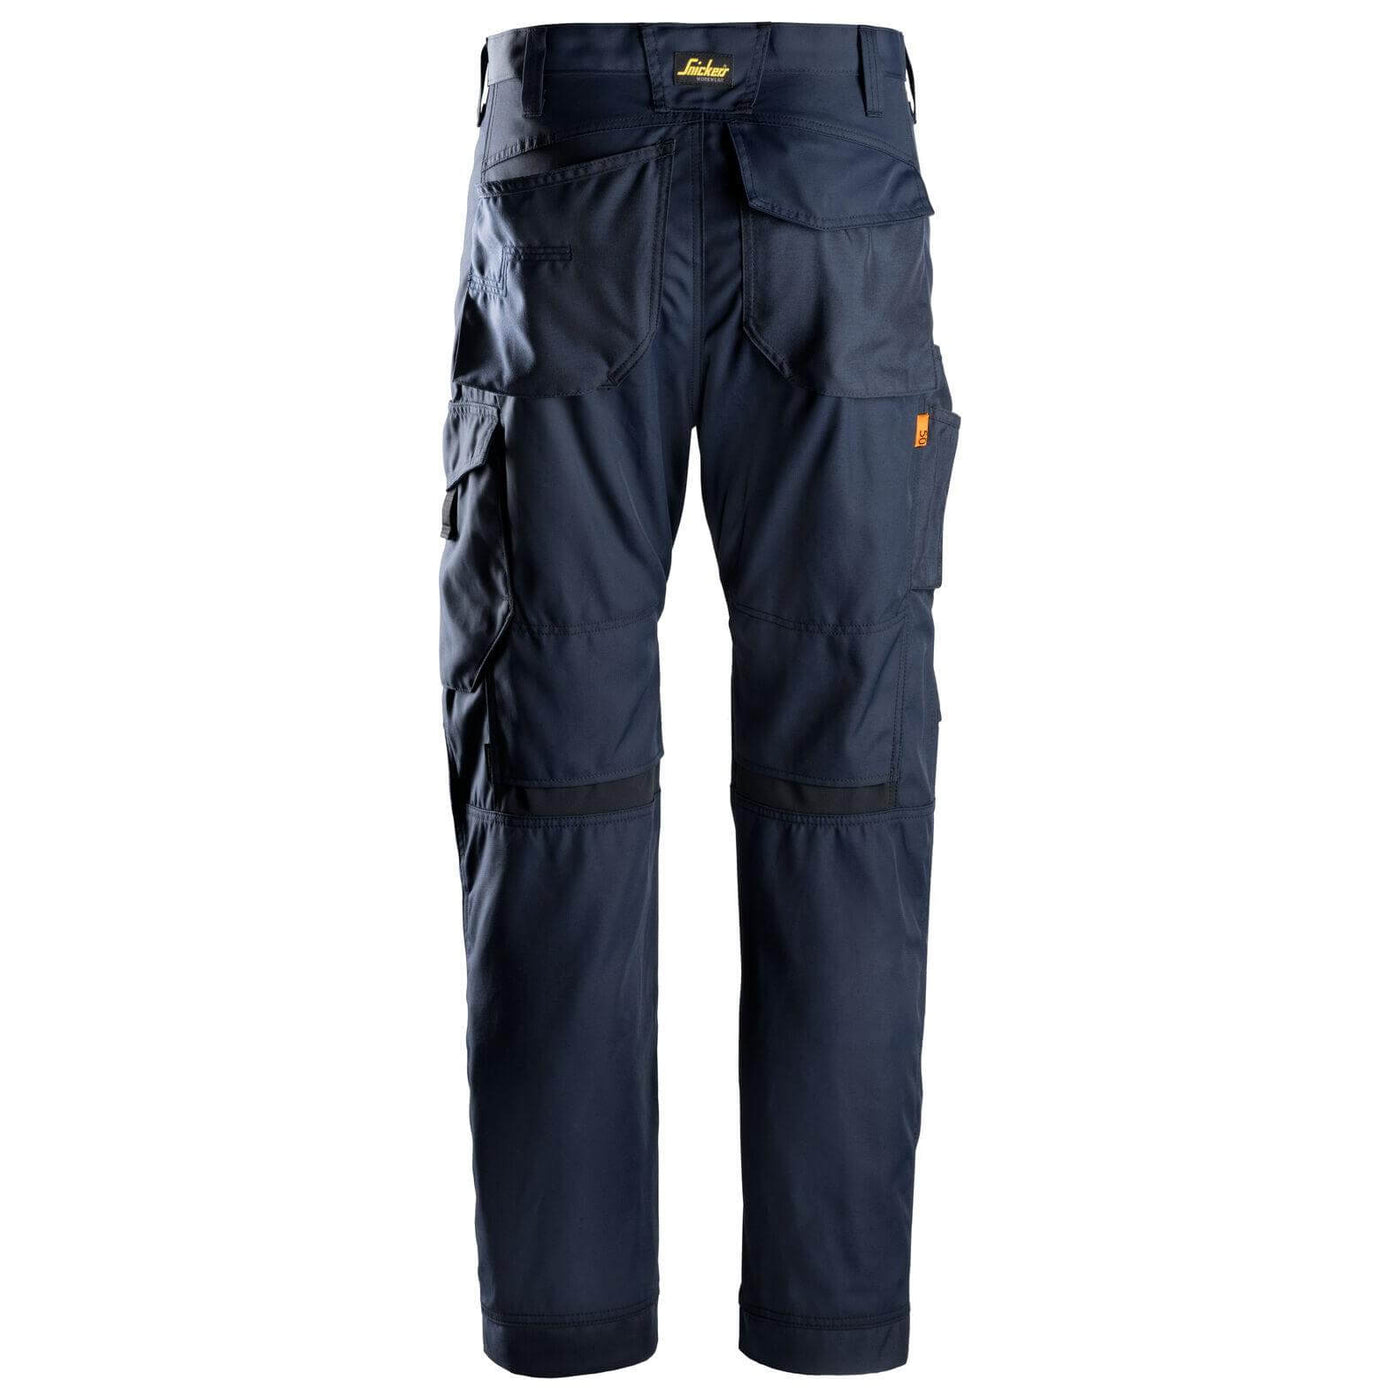 Snickers 6301 AllroundWork Cordura Work Trousers Navy Navy back3064716 #colour_navy-navy